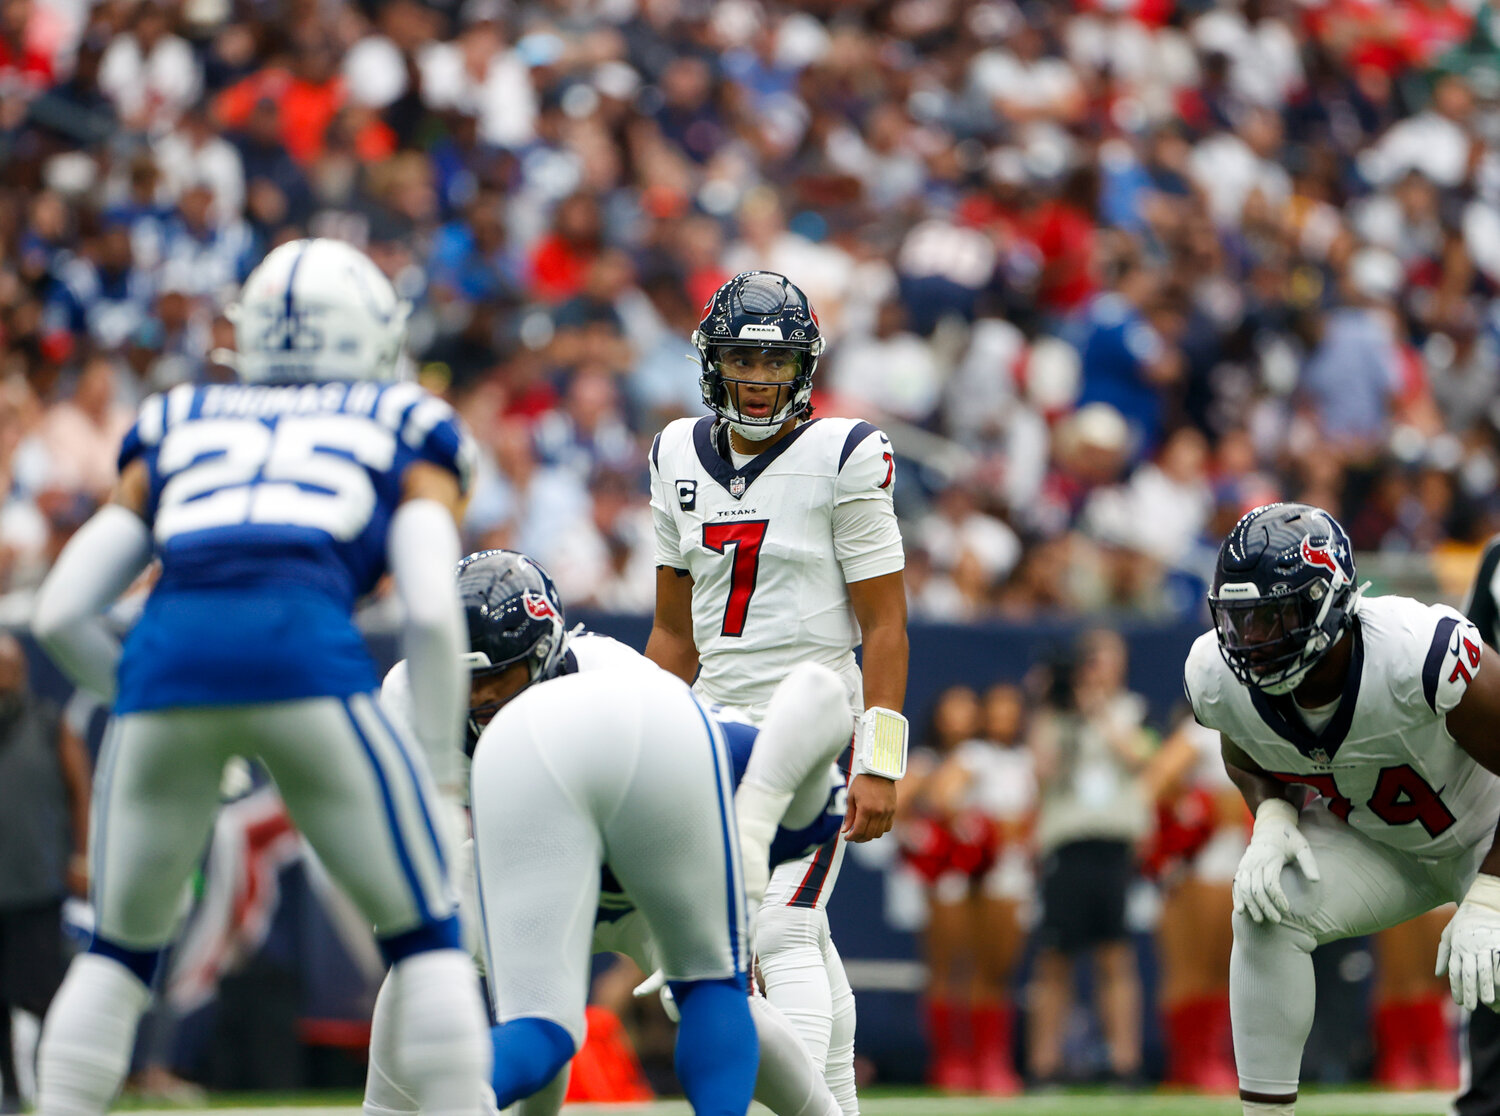 Texans quarterback C.J. Stroud (7) prepares for a snap during an NFL game between the Texans and the Colts on September 17, 2023 in Houston. The Colts won, 31-20.